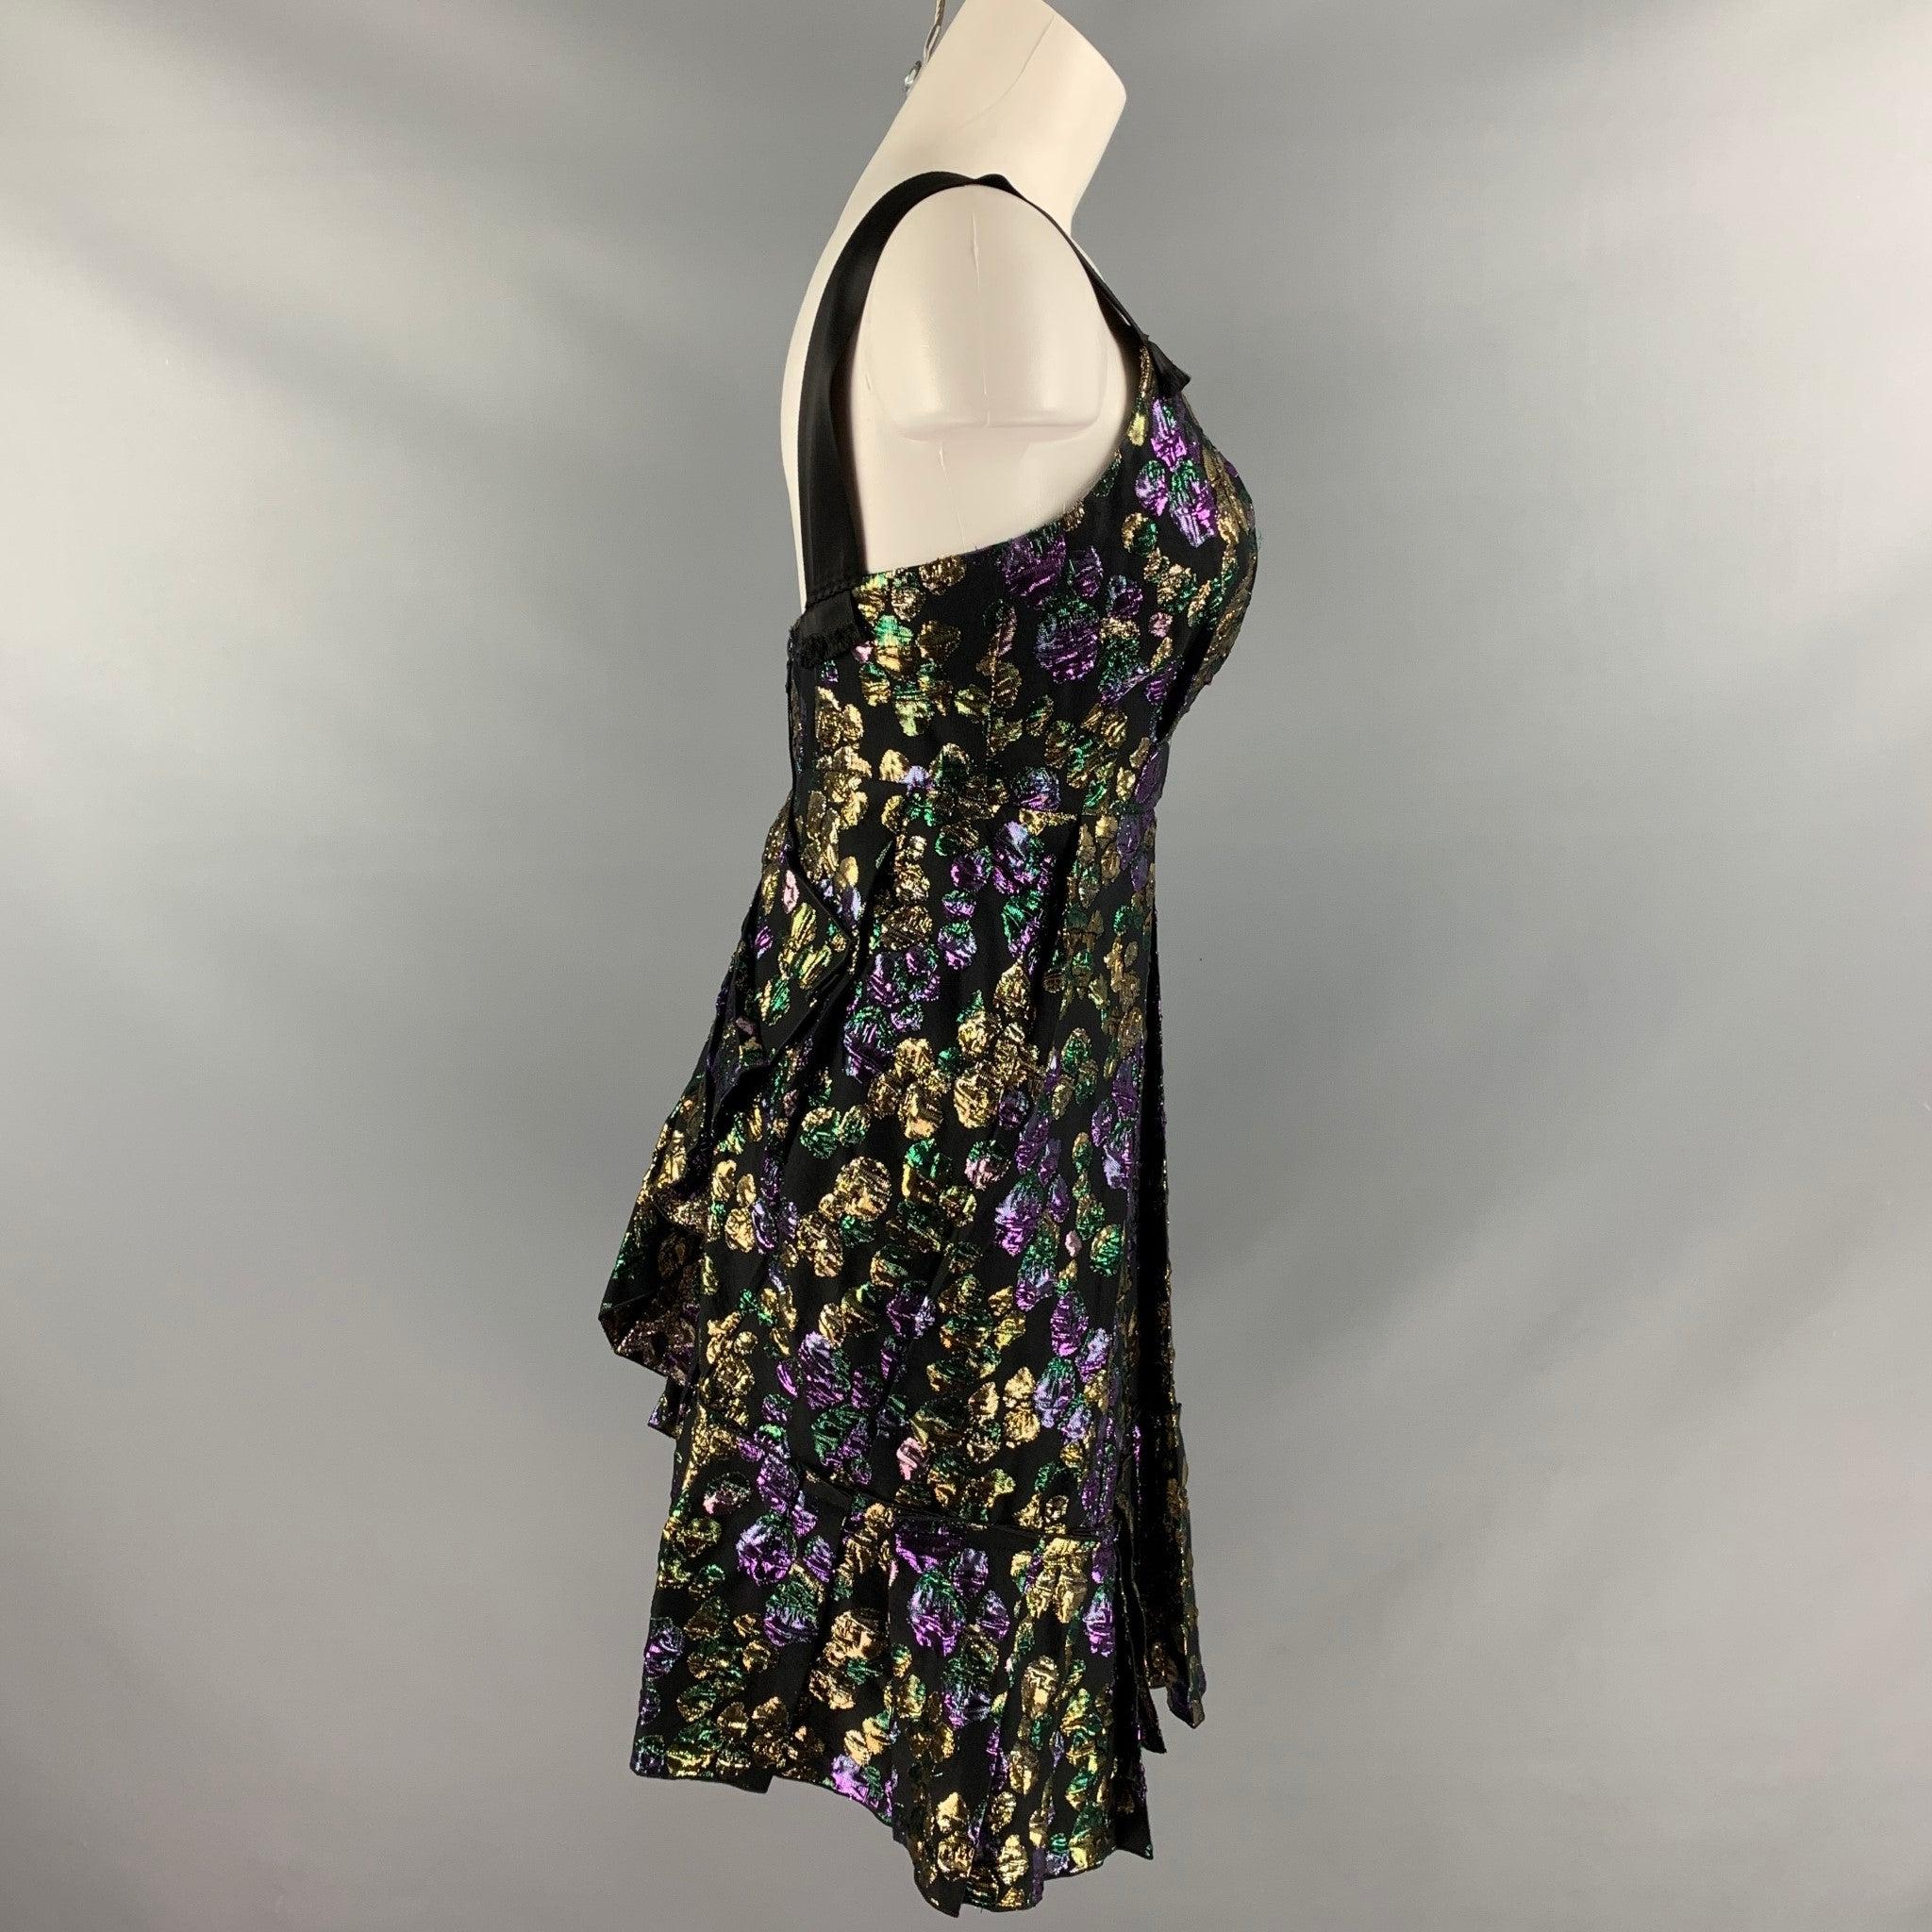 MARC JACOBS Size 2 Black, Gold & Purple Jacquard Cotton Blend Cocktail Dress In Excellent Condition For Sale In San Francisco, CA